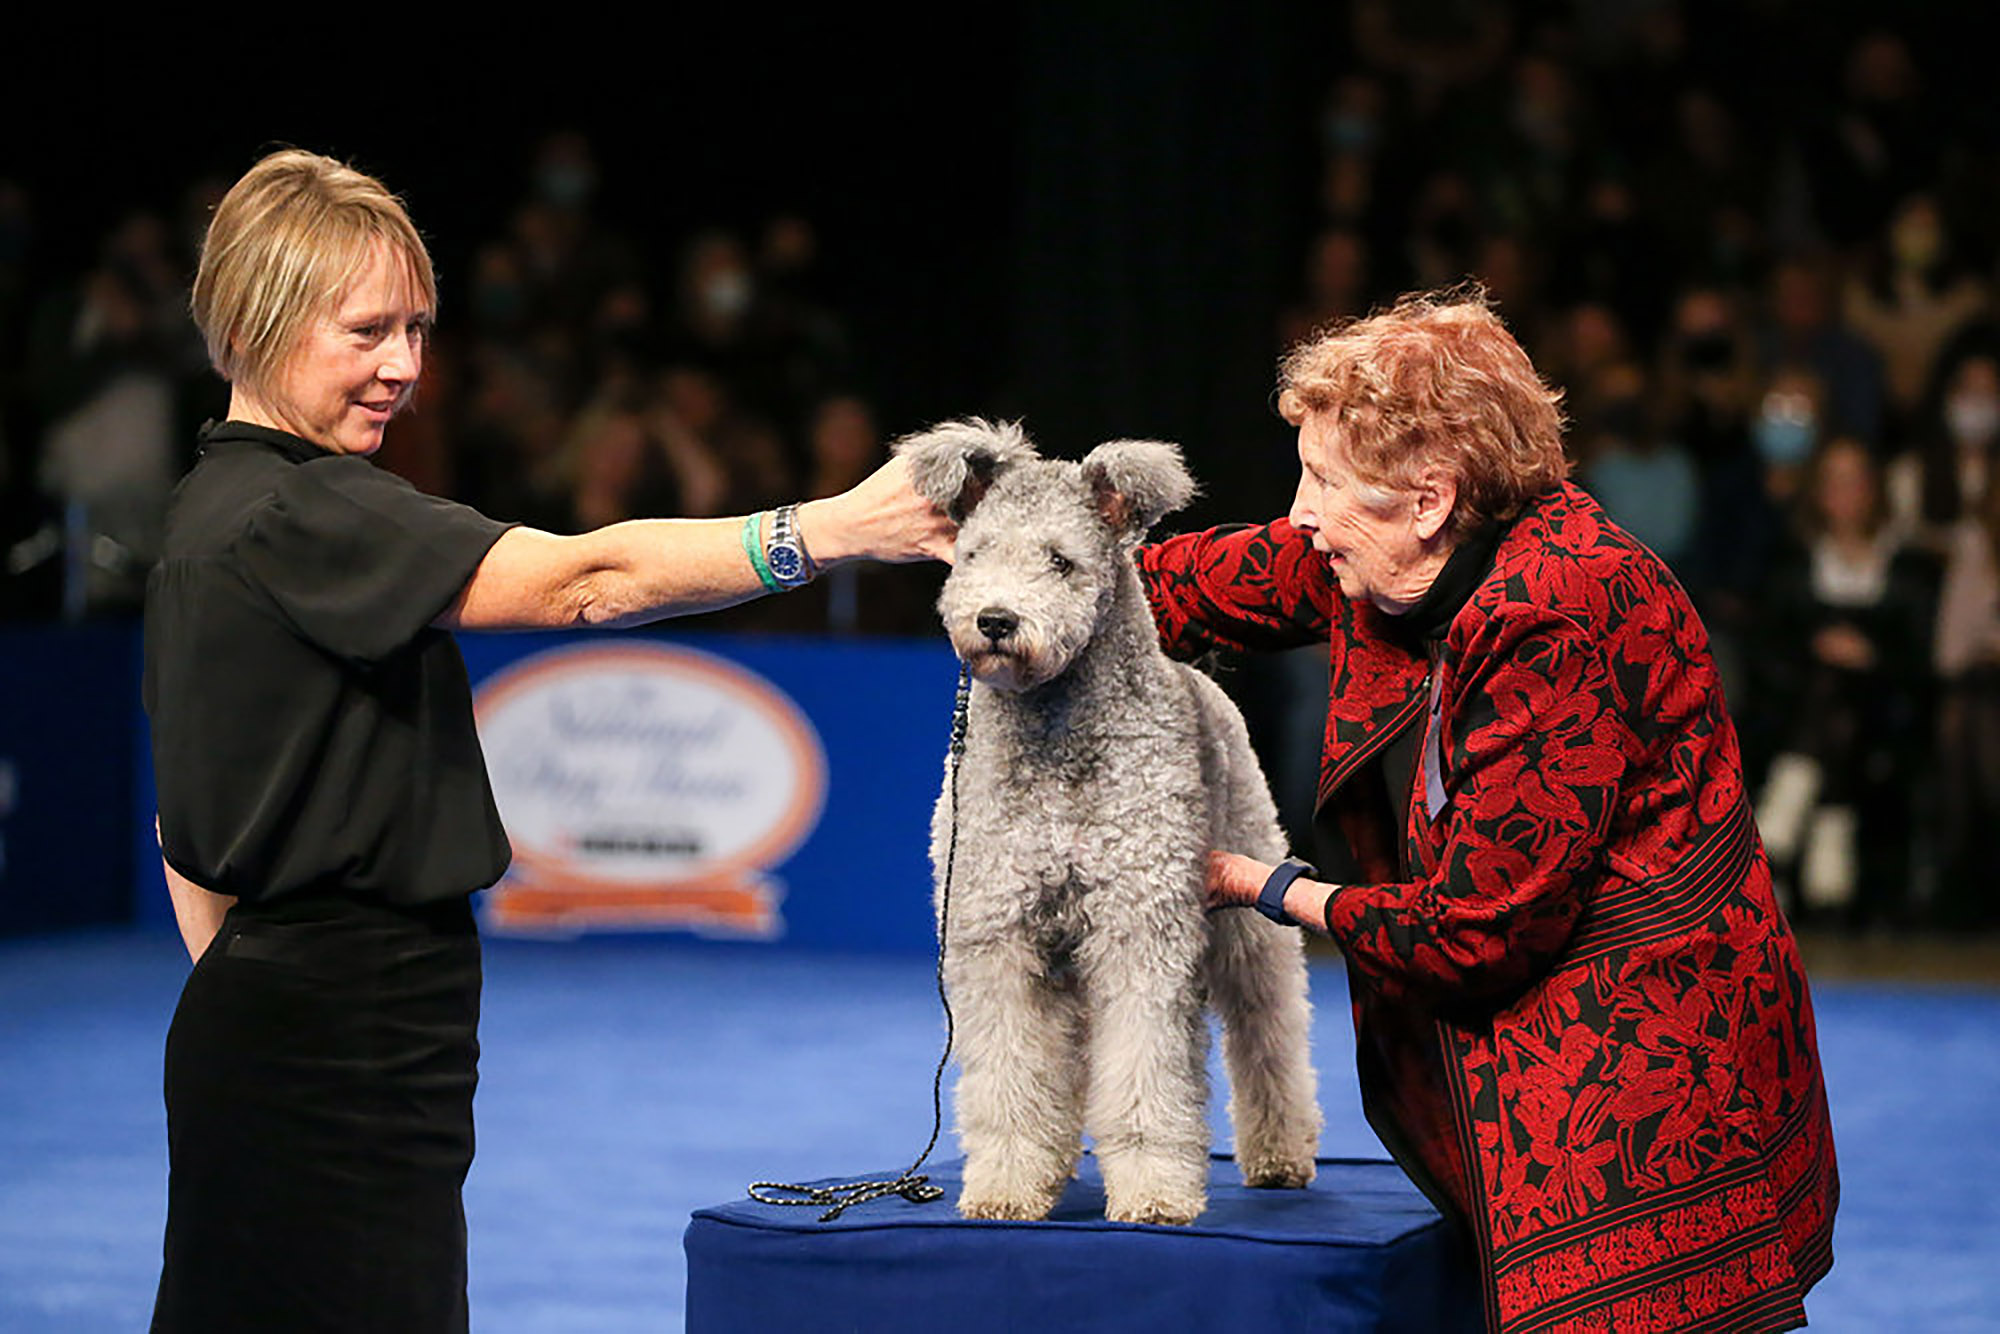 The Pumi was recognized as a breed by the AKC in 2016.